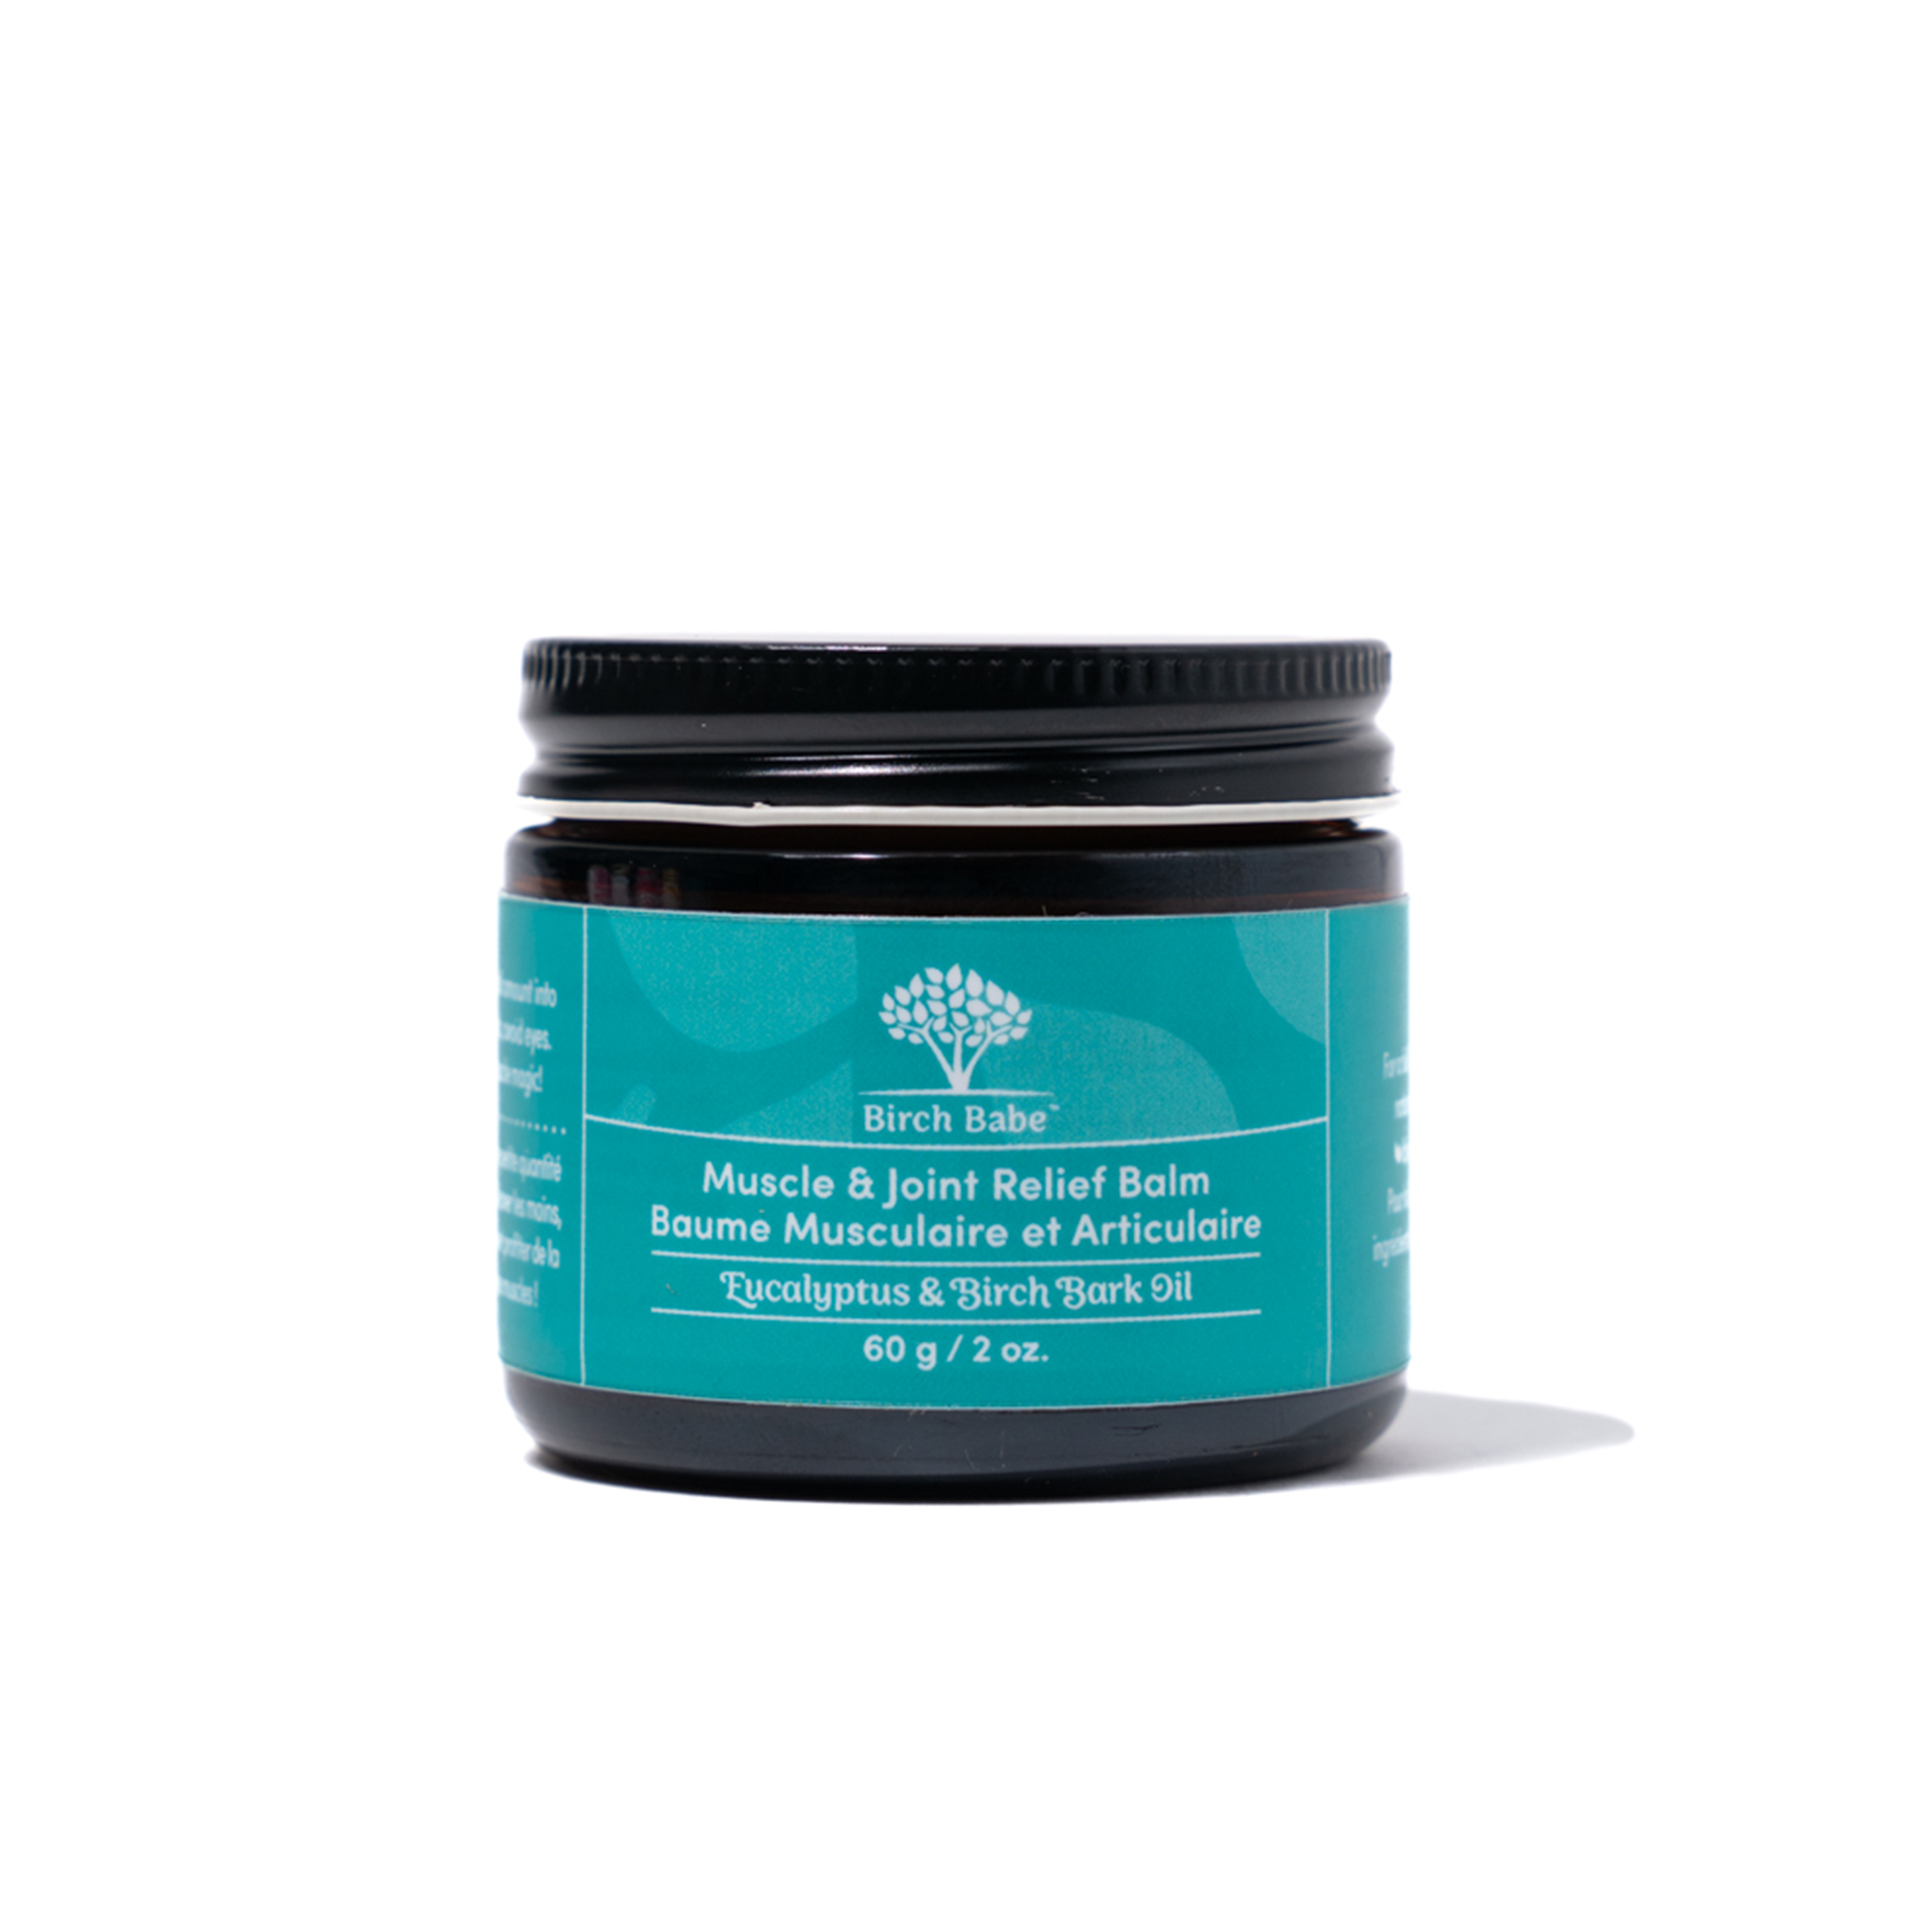 Muscle & Joint Relief Balm